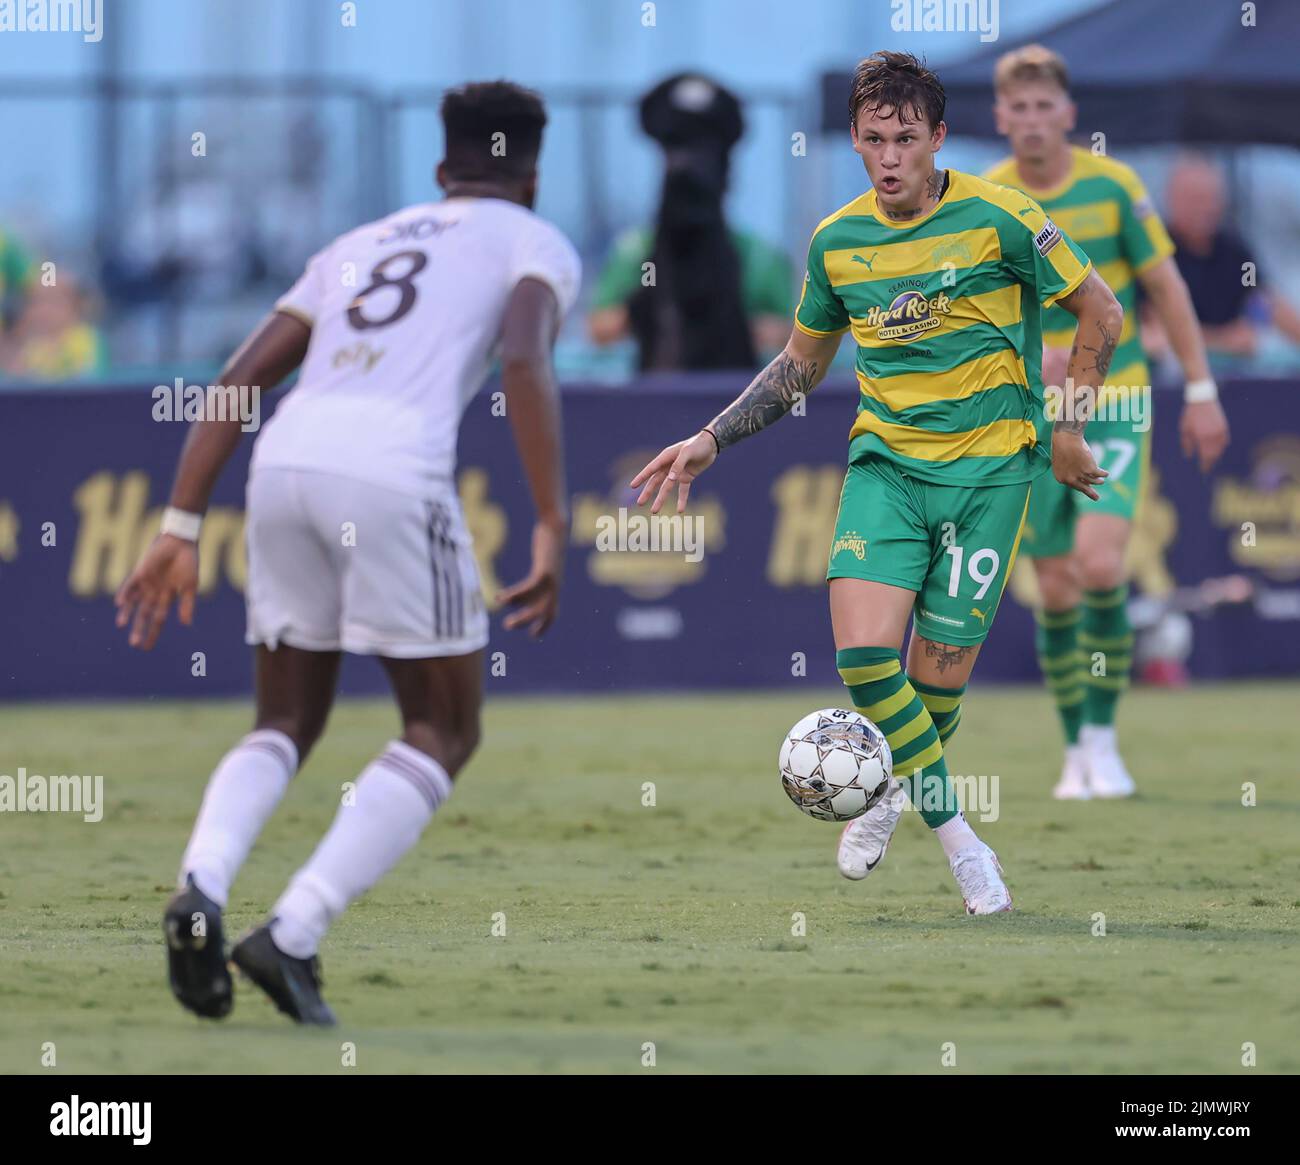 St. Petersburg, FL: Tampa Bay Rowdies forward Jake LaCava (19)dribbles the ball and looks to pass around Detroit City midfielder  Abdoulaye Drop (8) d Stock Photo